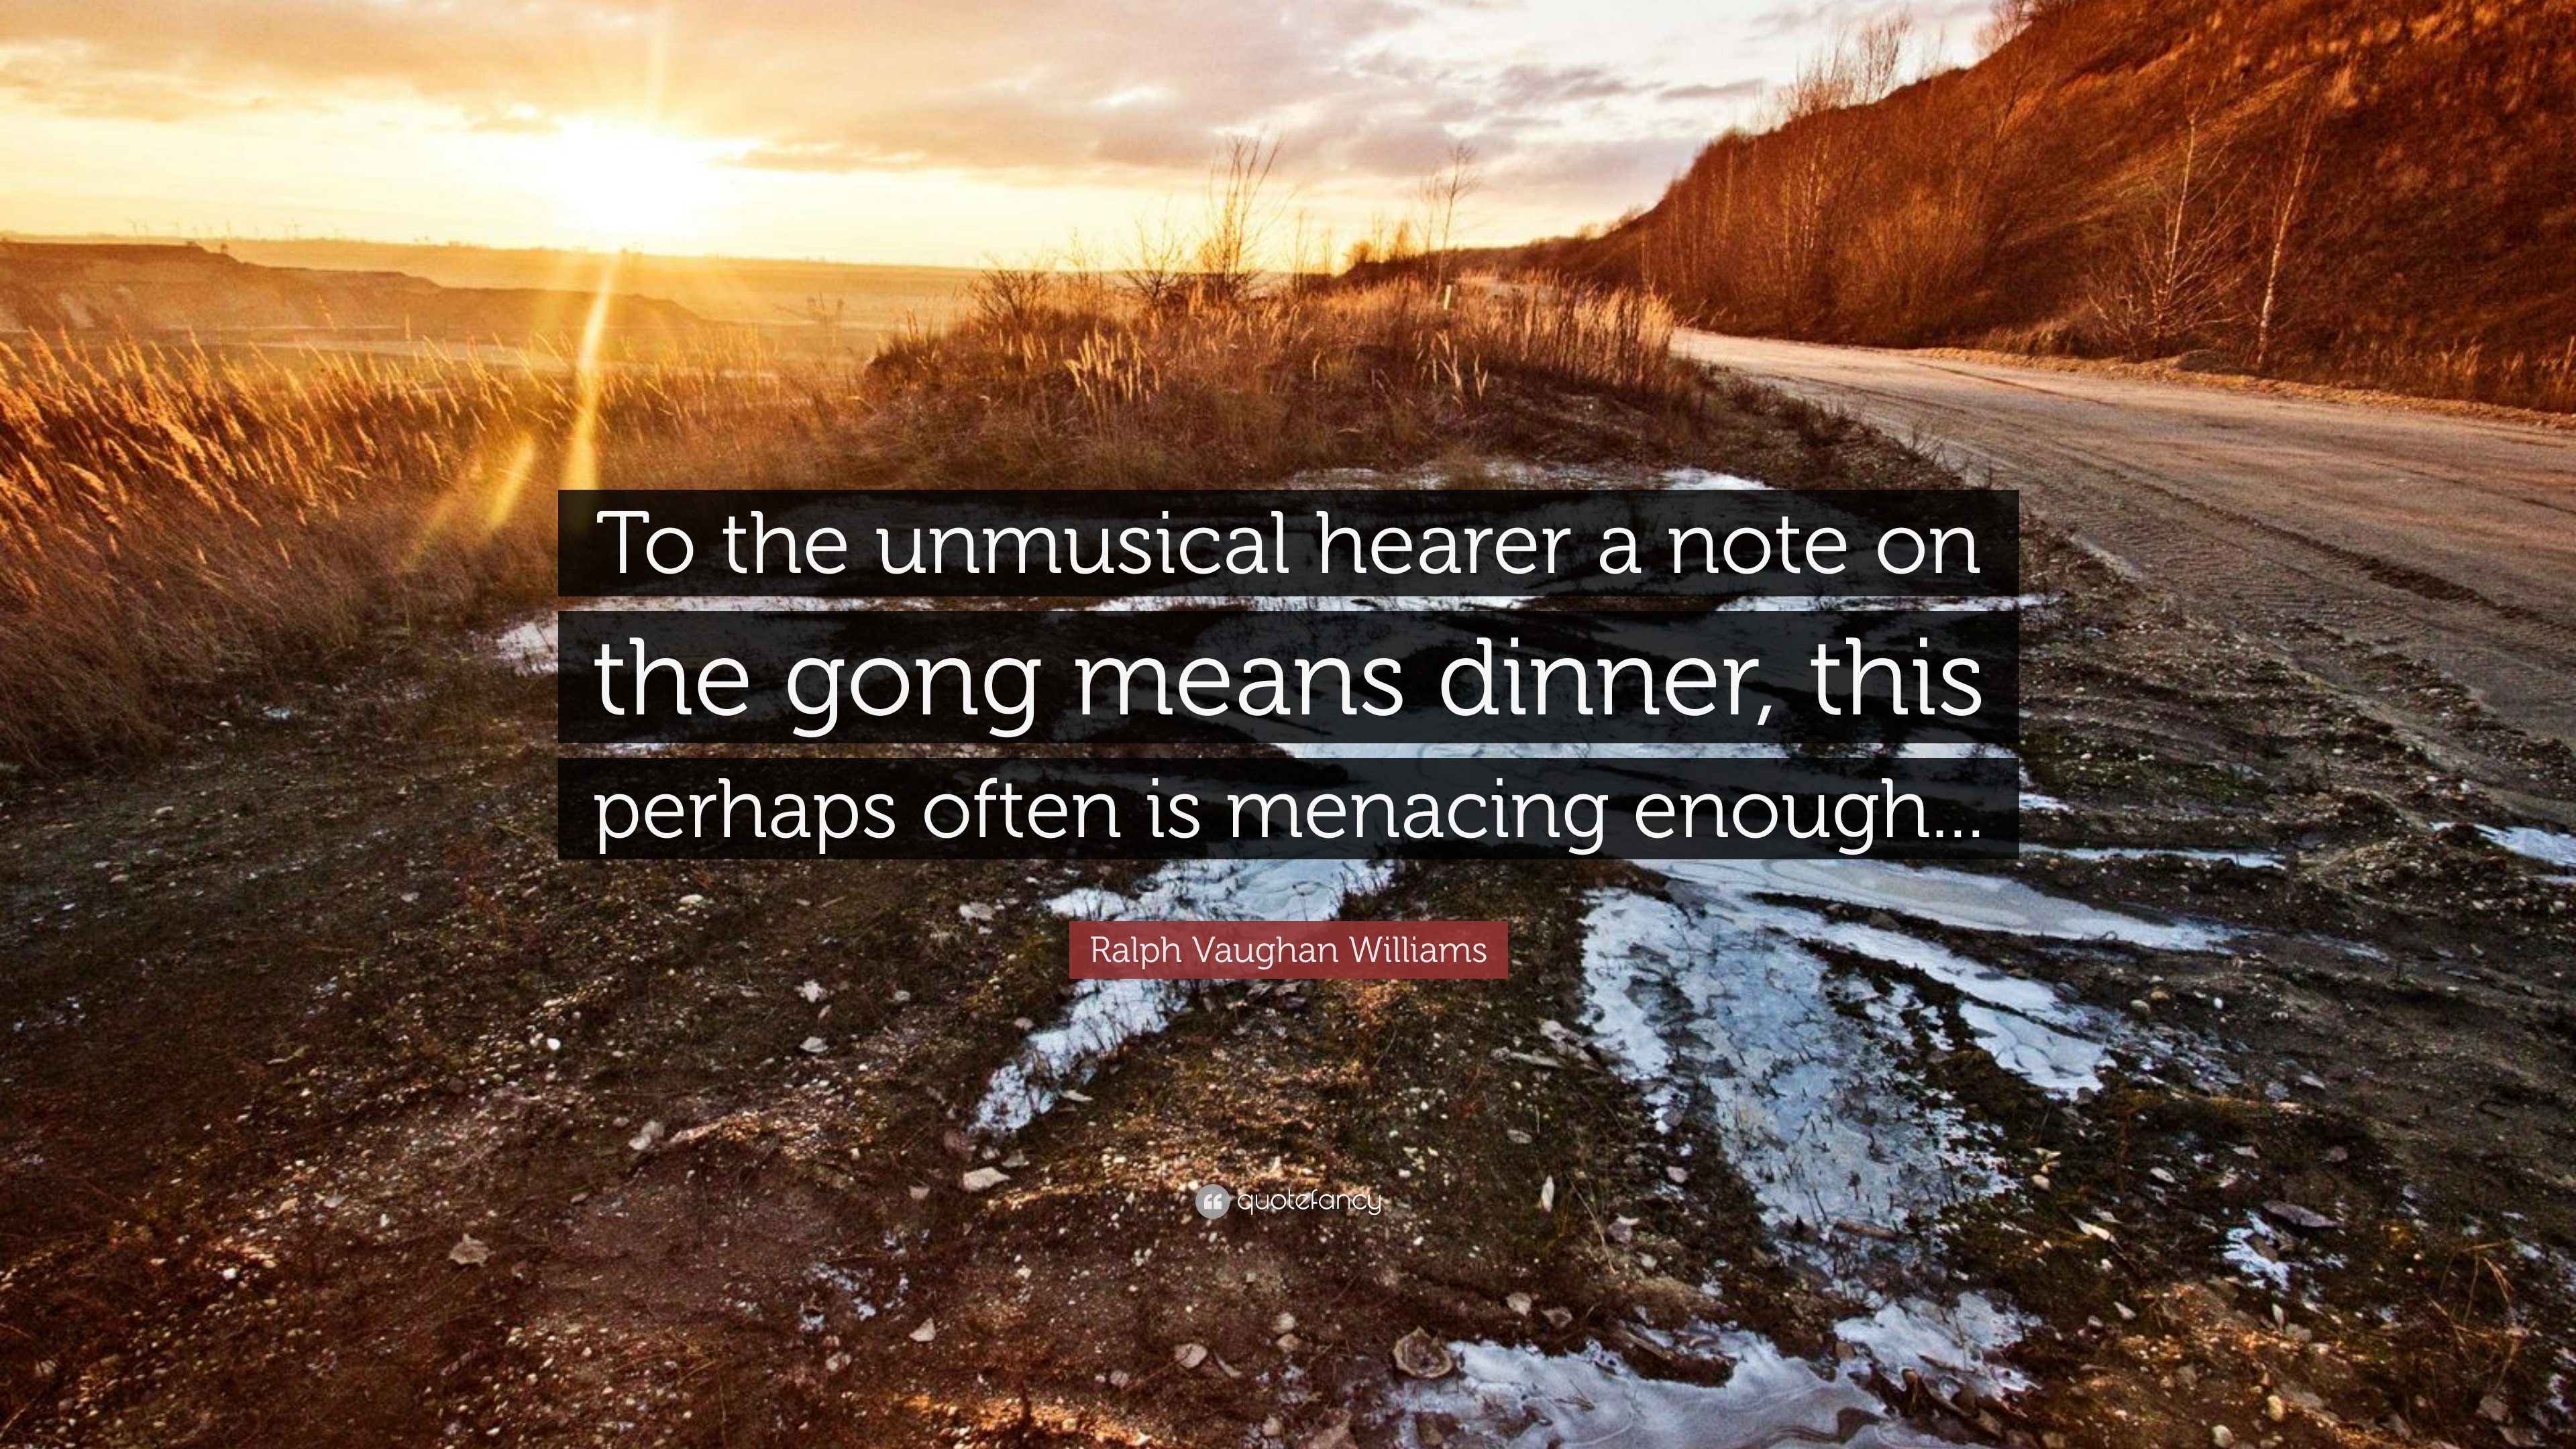 Ralph Vaughan Williams Quote: “To the unmusical hearer a note on the gong  means dinner, this